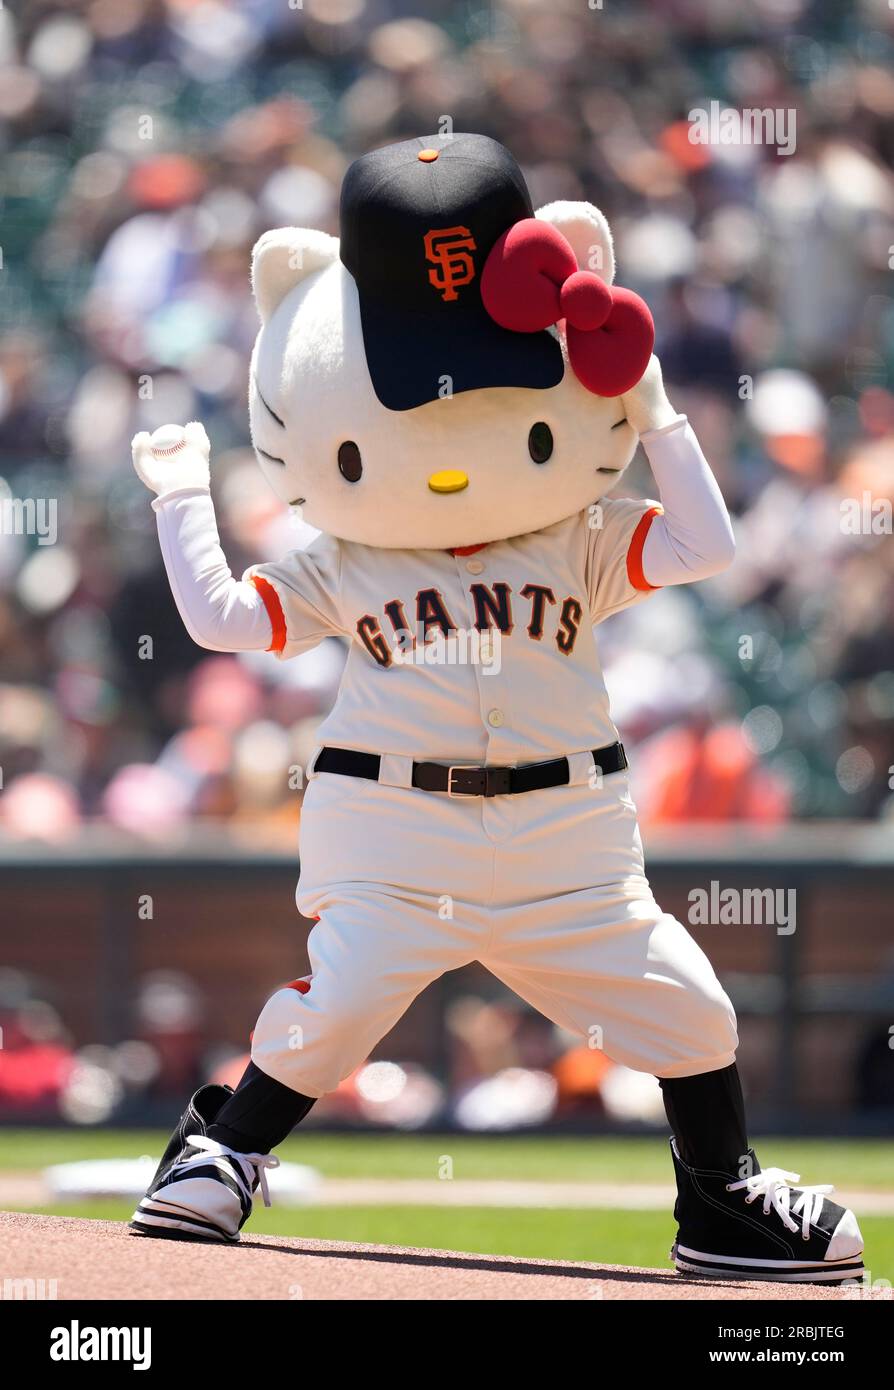 Hello Kitty throws out the ceremonial first pitch before a